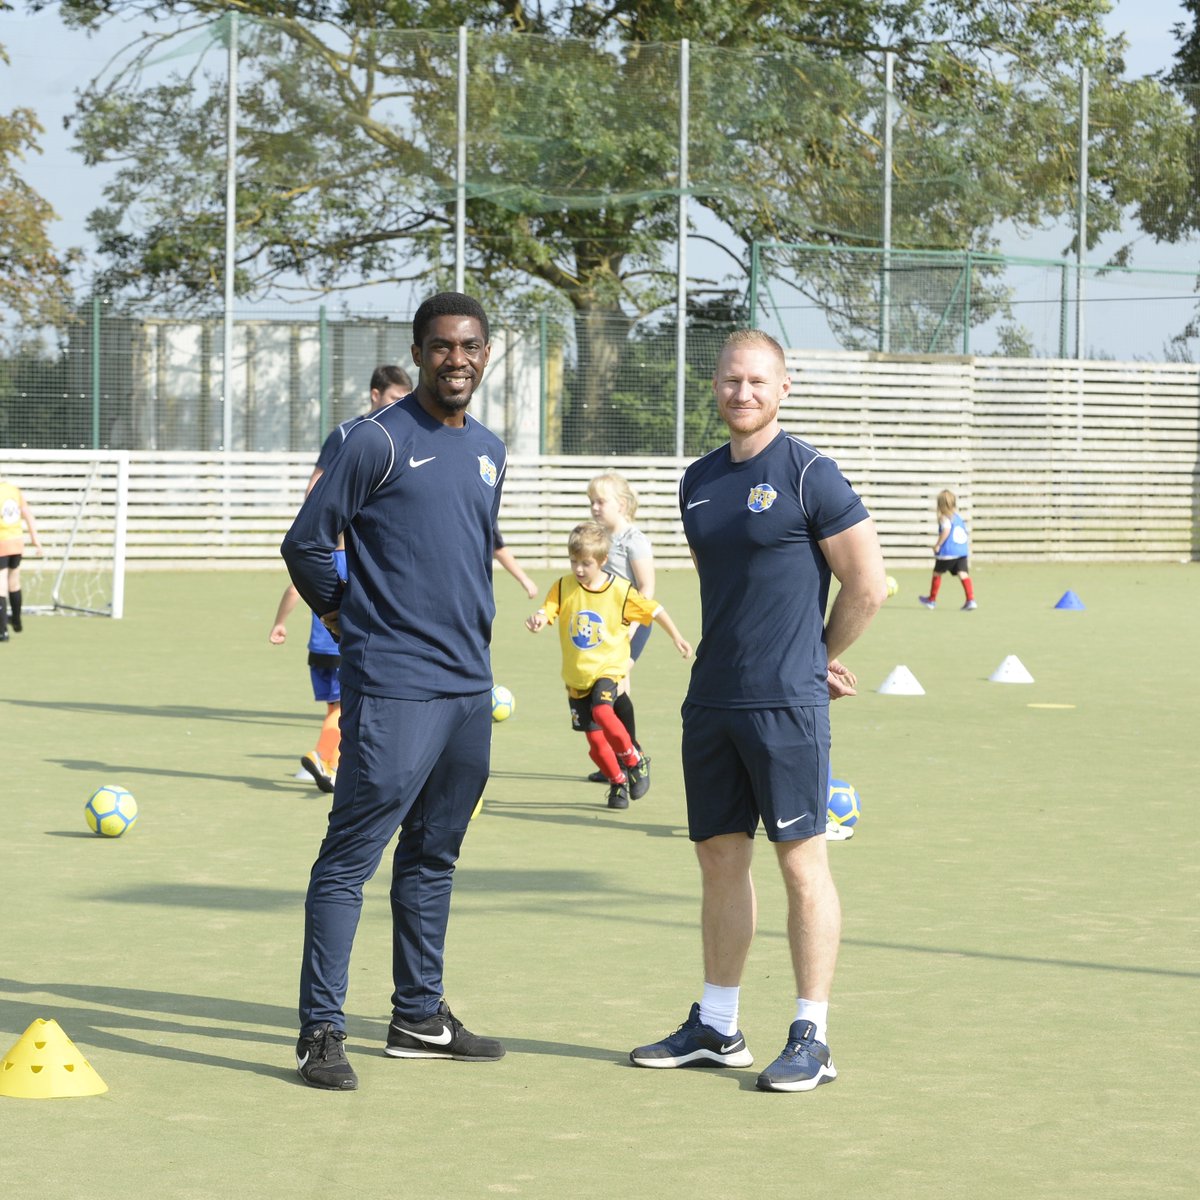 🏴󠁧󠁢󠁷󠁬󠁳󠁿 WHEN EBUN JOINED the FFF, he became the first Football Fun Factory coach in Wales! He now works alongside coach Anthony and coach Mikey and the FFF now covers Swansea, Cardiff and Bridgend. ⁠

#FootballFranchise #WelshFootball #FootballWales #FootballBusiness